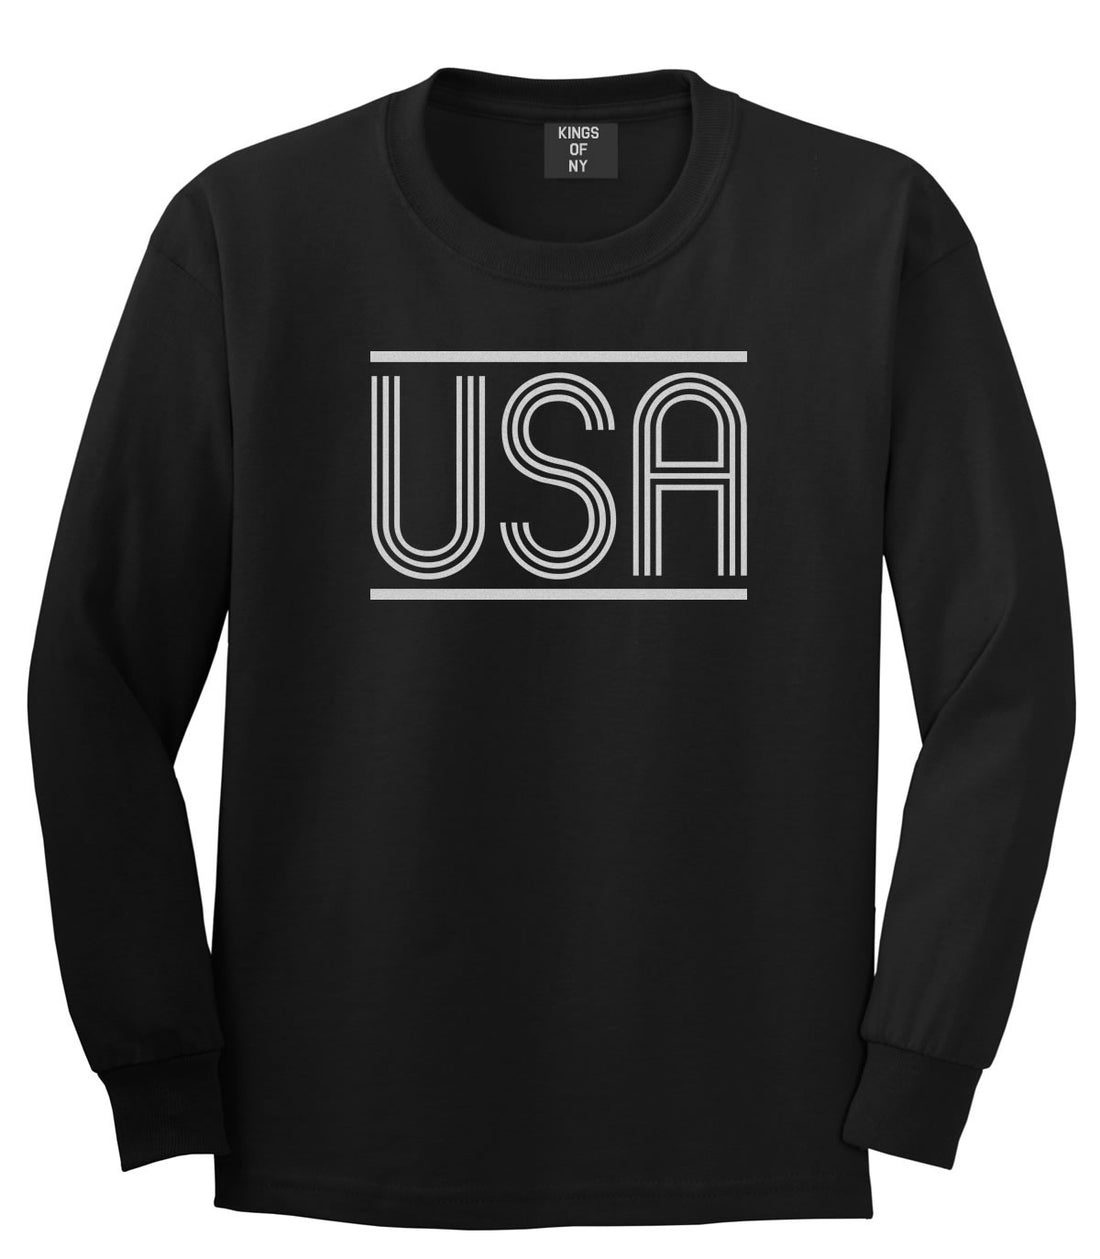 USA America Fall15 Long Sleeve T-Shirt in Black by Kings Of NY